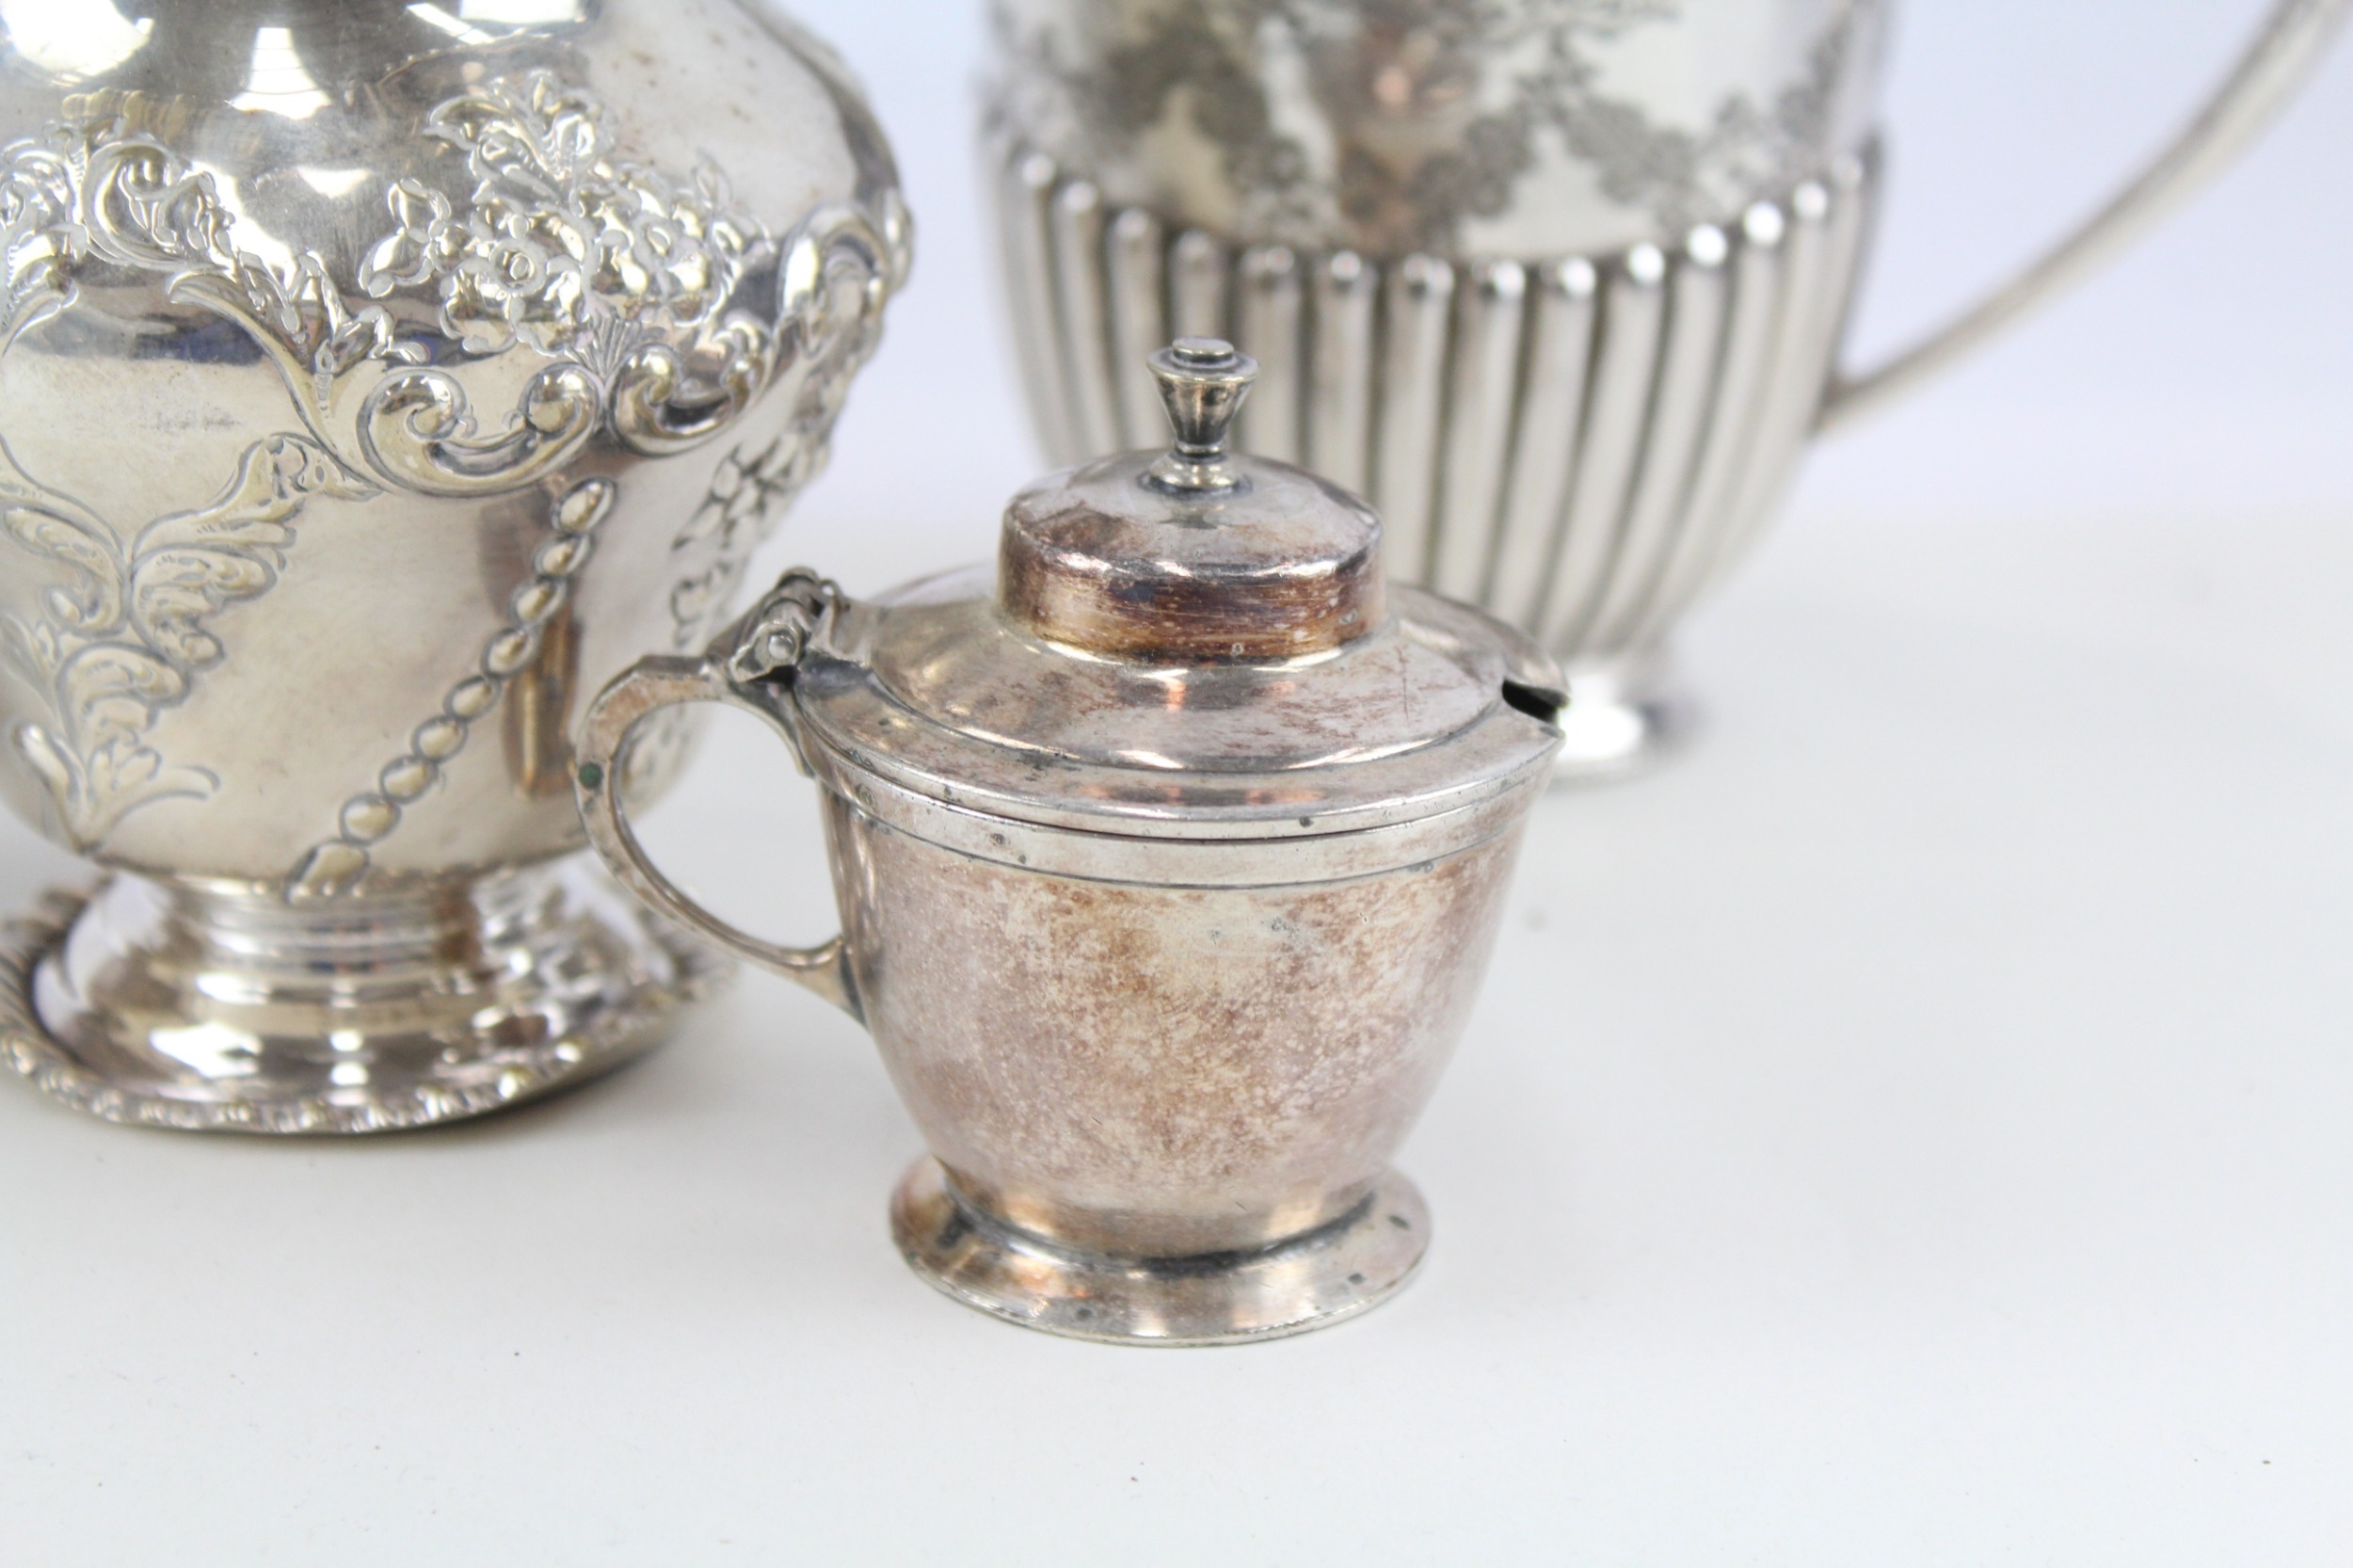 Silver Plate Ware Antique Vintage Victorian Creamer Teapot George III x 5 2164g - Image 5 of 6